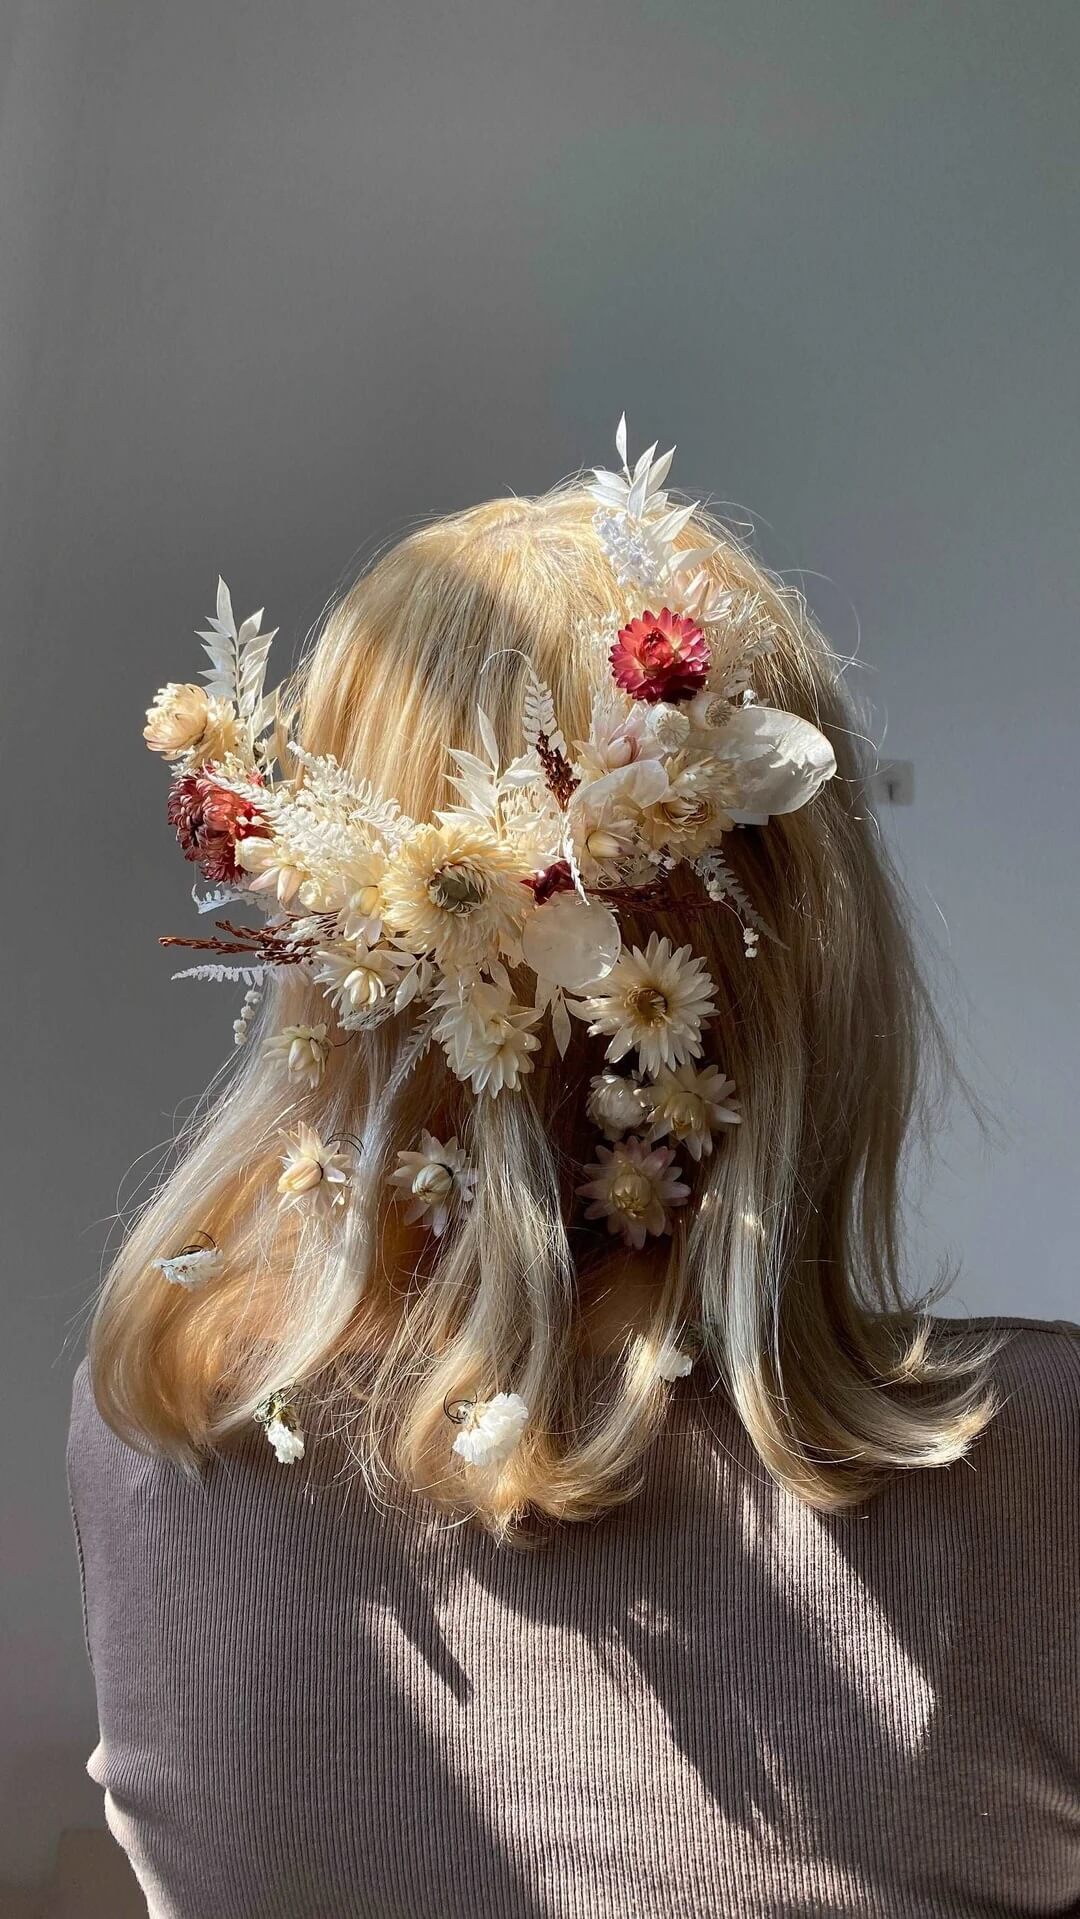 Hidden Botanics’ dried flowers bridal hair comb with white and red flowers.